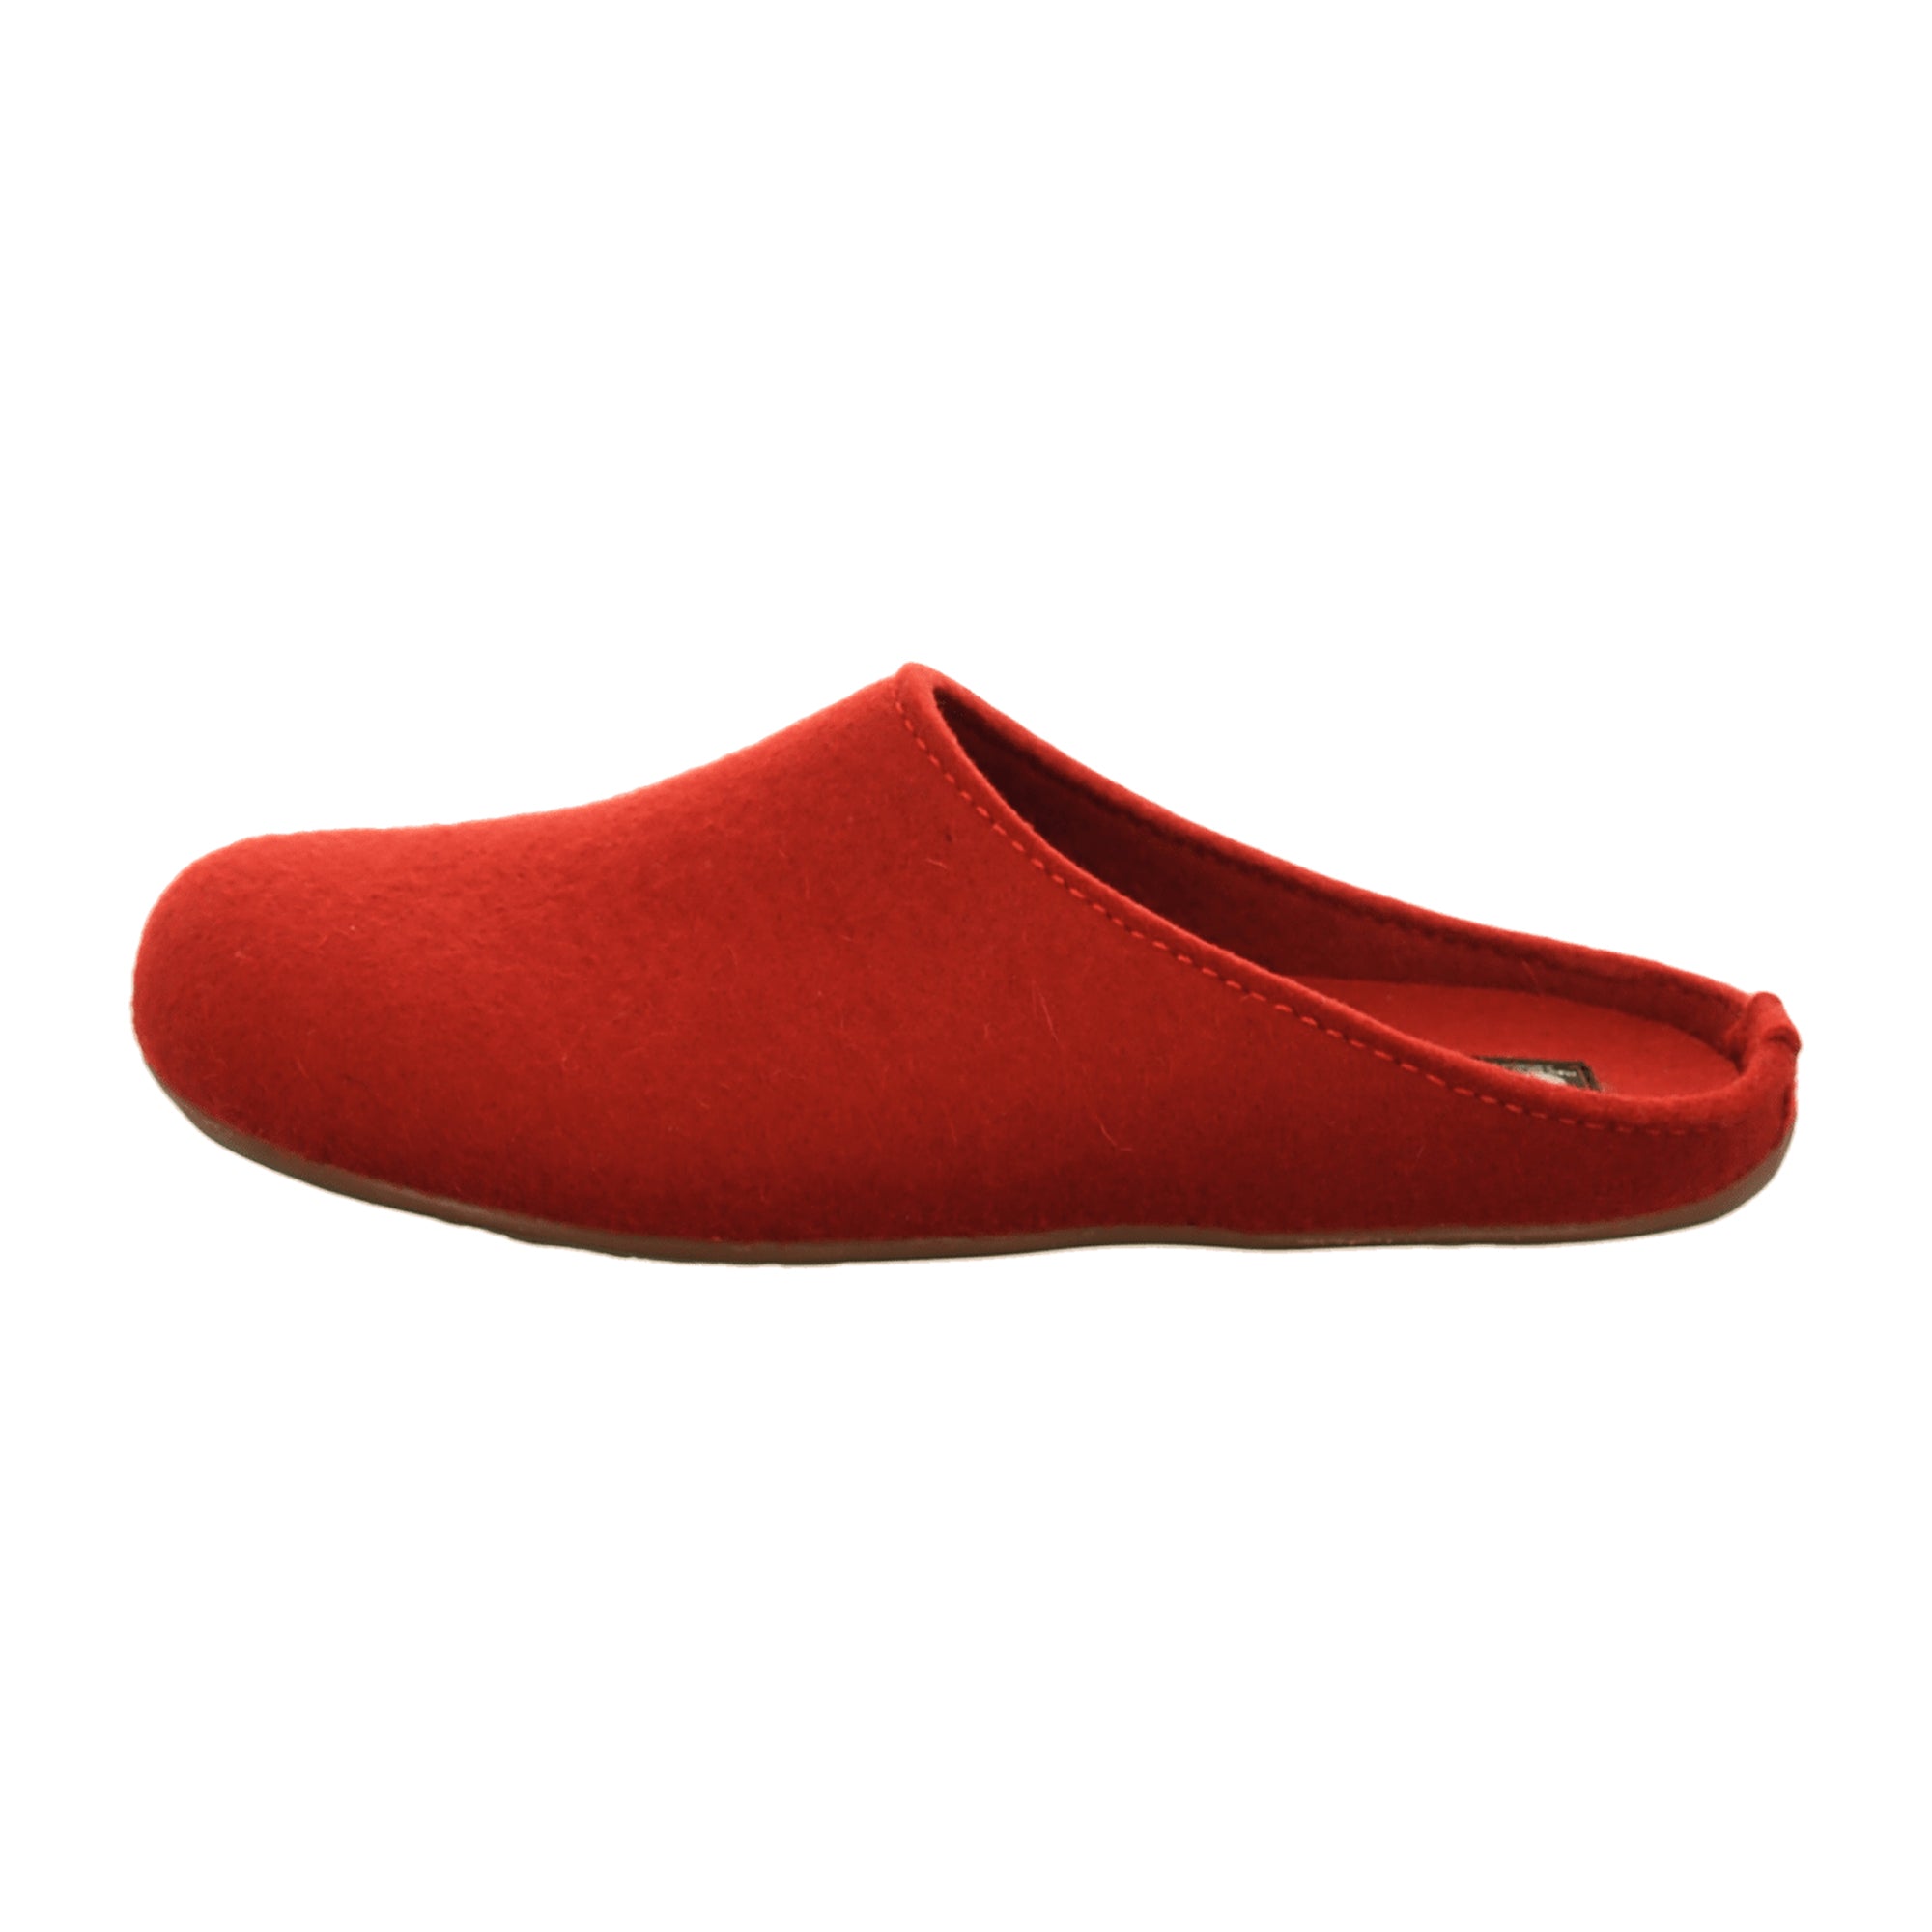 Haflinger Women's Wool Clogs 48102411 - Comfortable and Stylish Red Footwear